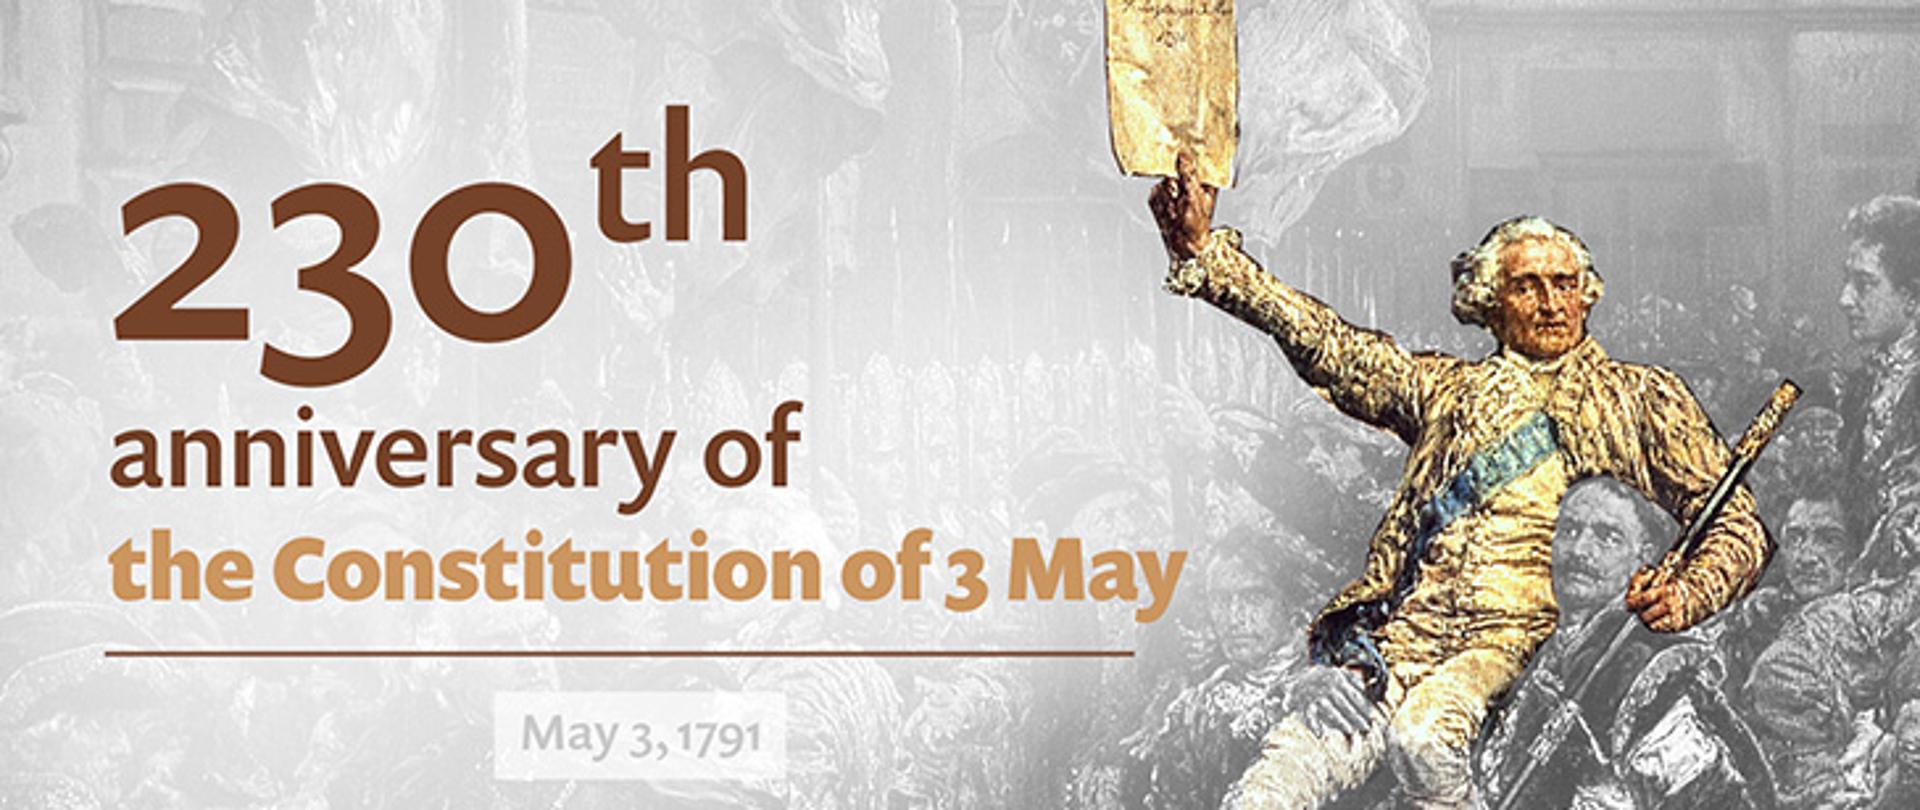 230 th anniversary of the Constitution of 3 of May 